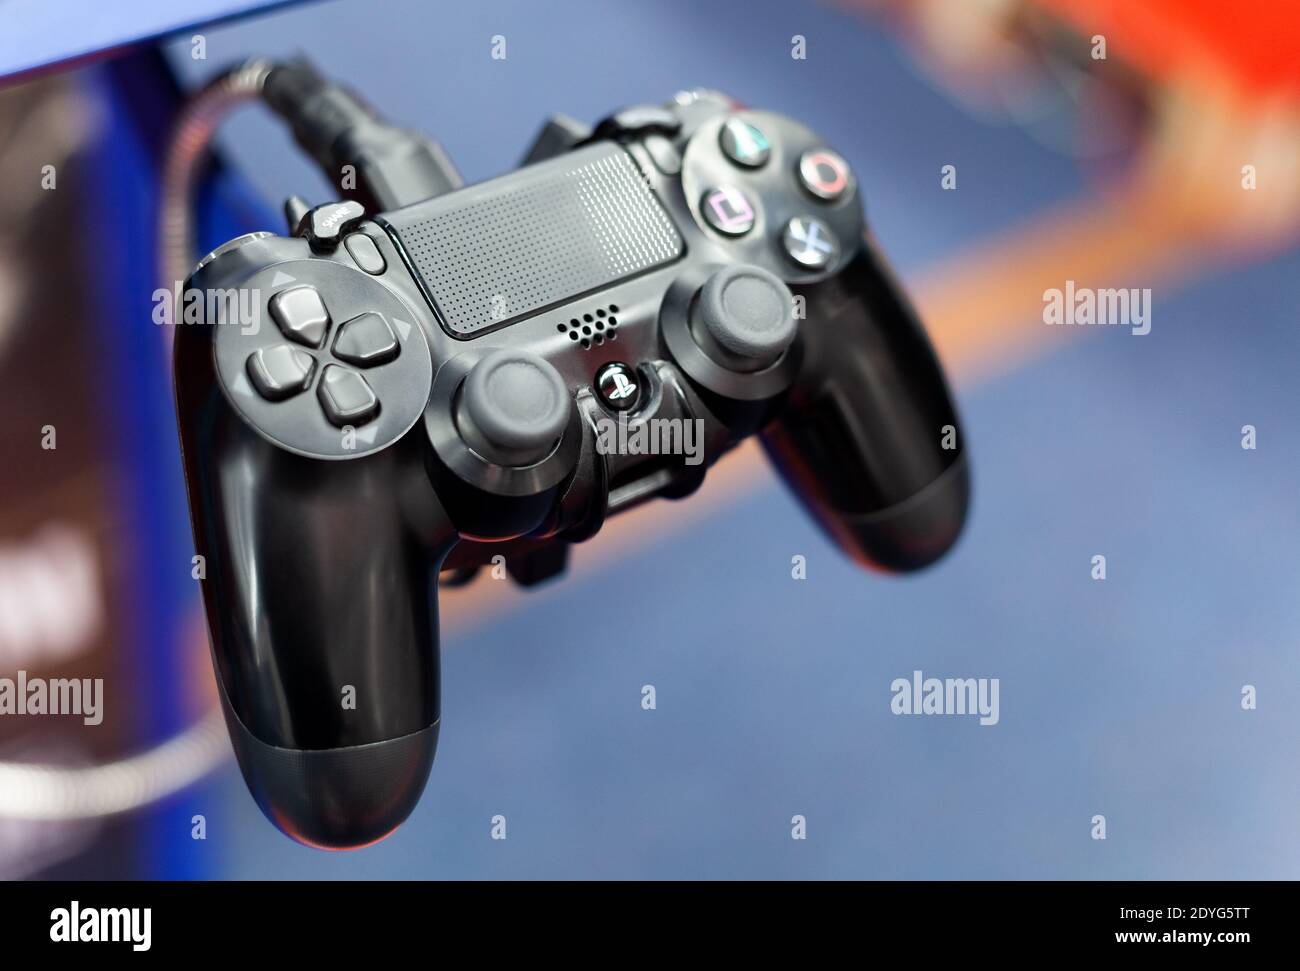 PS4 controller closeup, shallow depth of field. PlayStation 4 pad plugged in up close. Console gamepad, input devices concept, technology, nobody Stock Photo